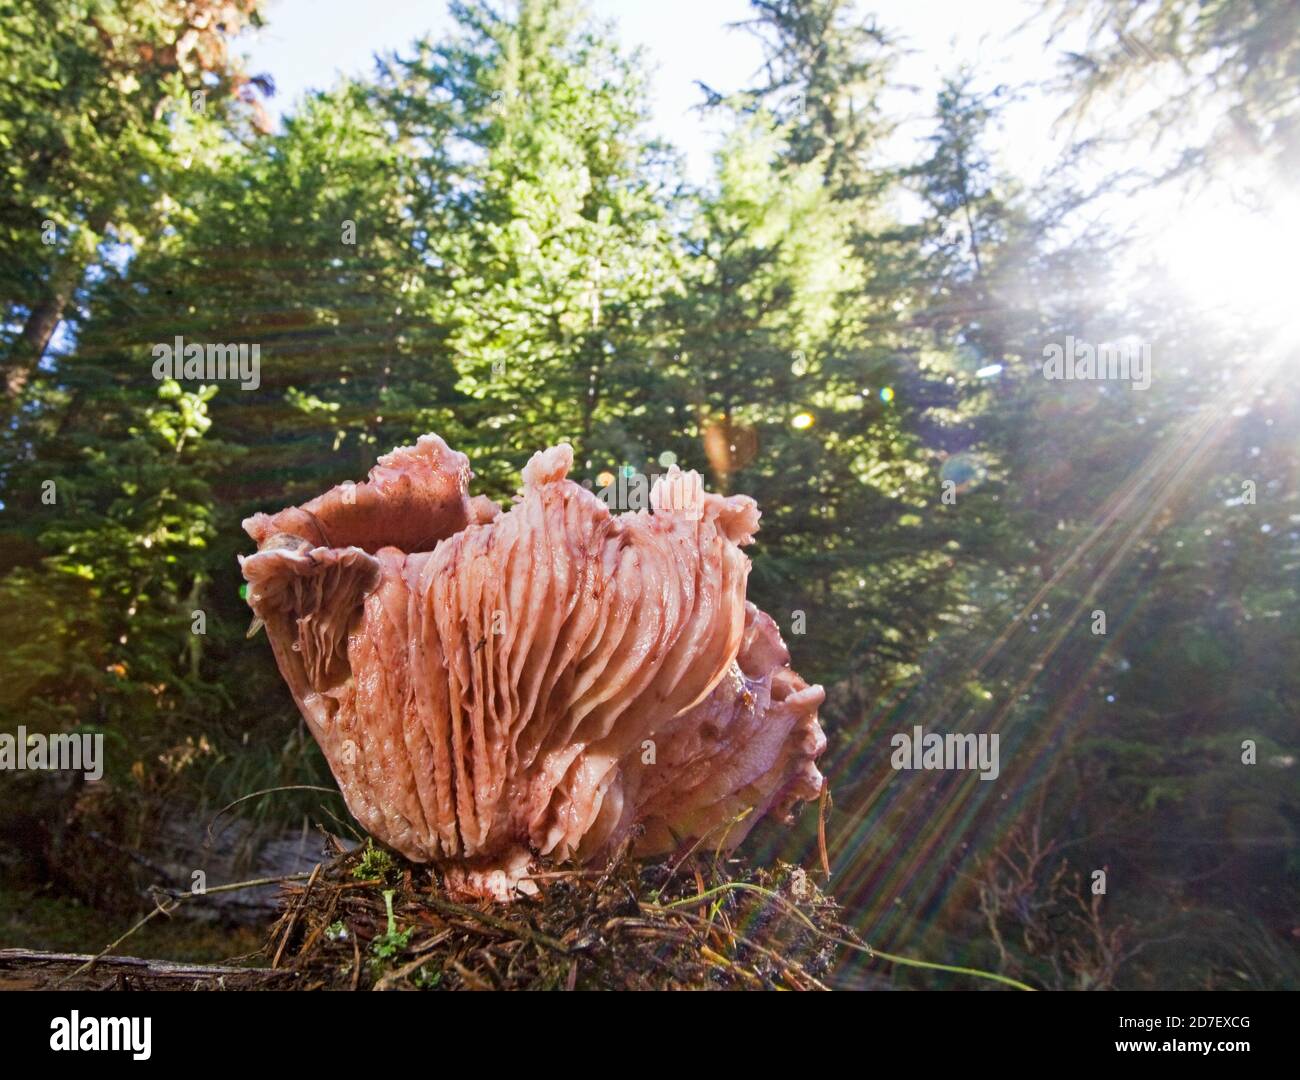 Hygrophorus russula, a large pink mushroom found in the Pacific Northwest. This one is in the Cascade Mountains of central Oregon. Not edible. Stock Photo